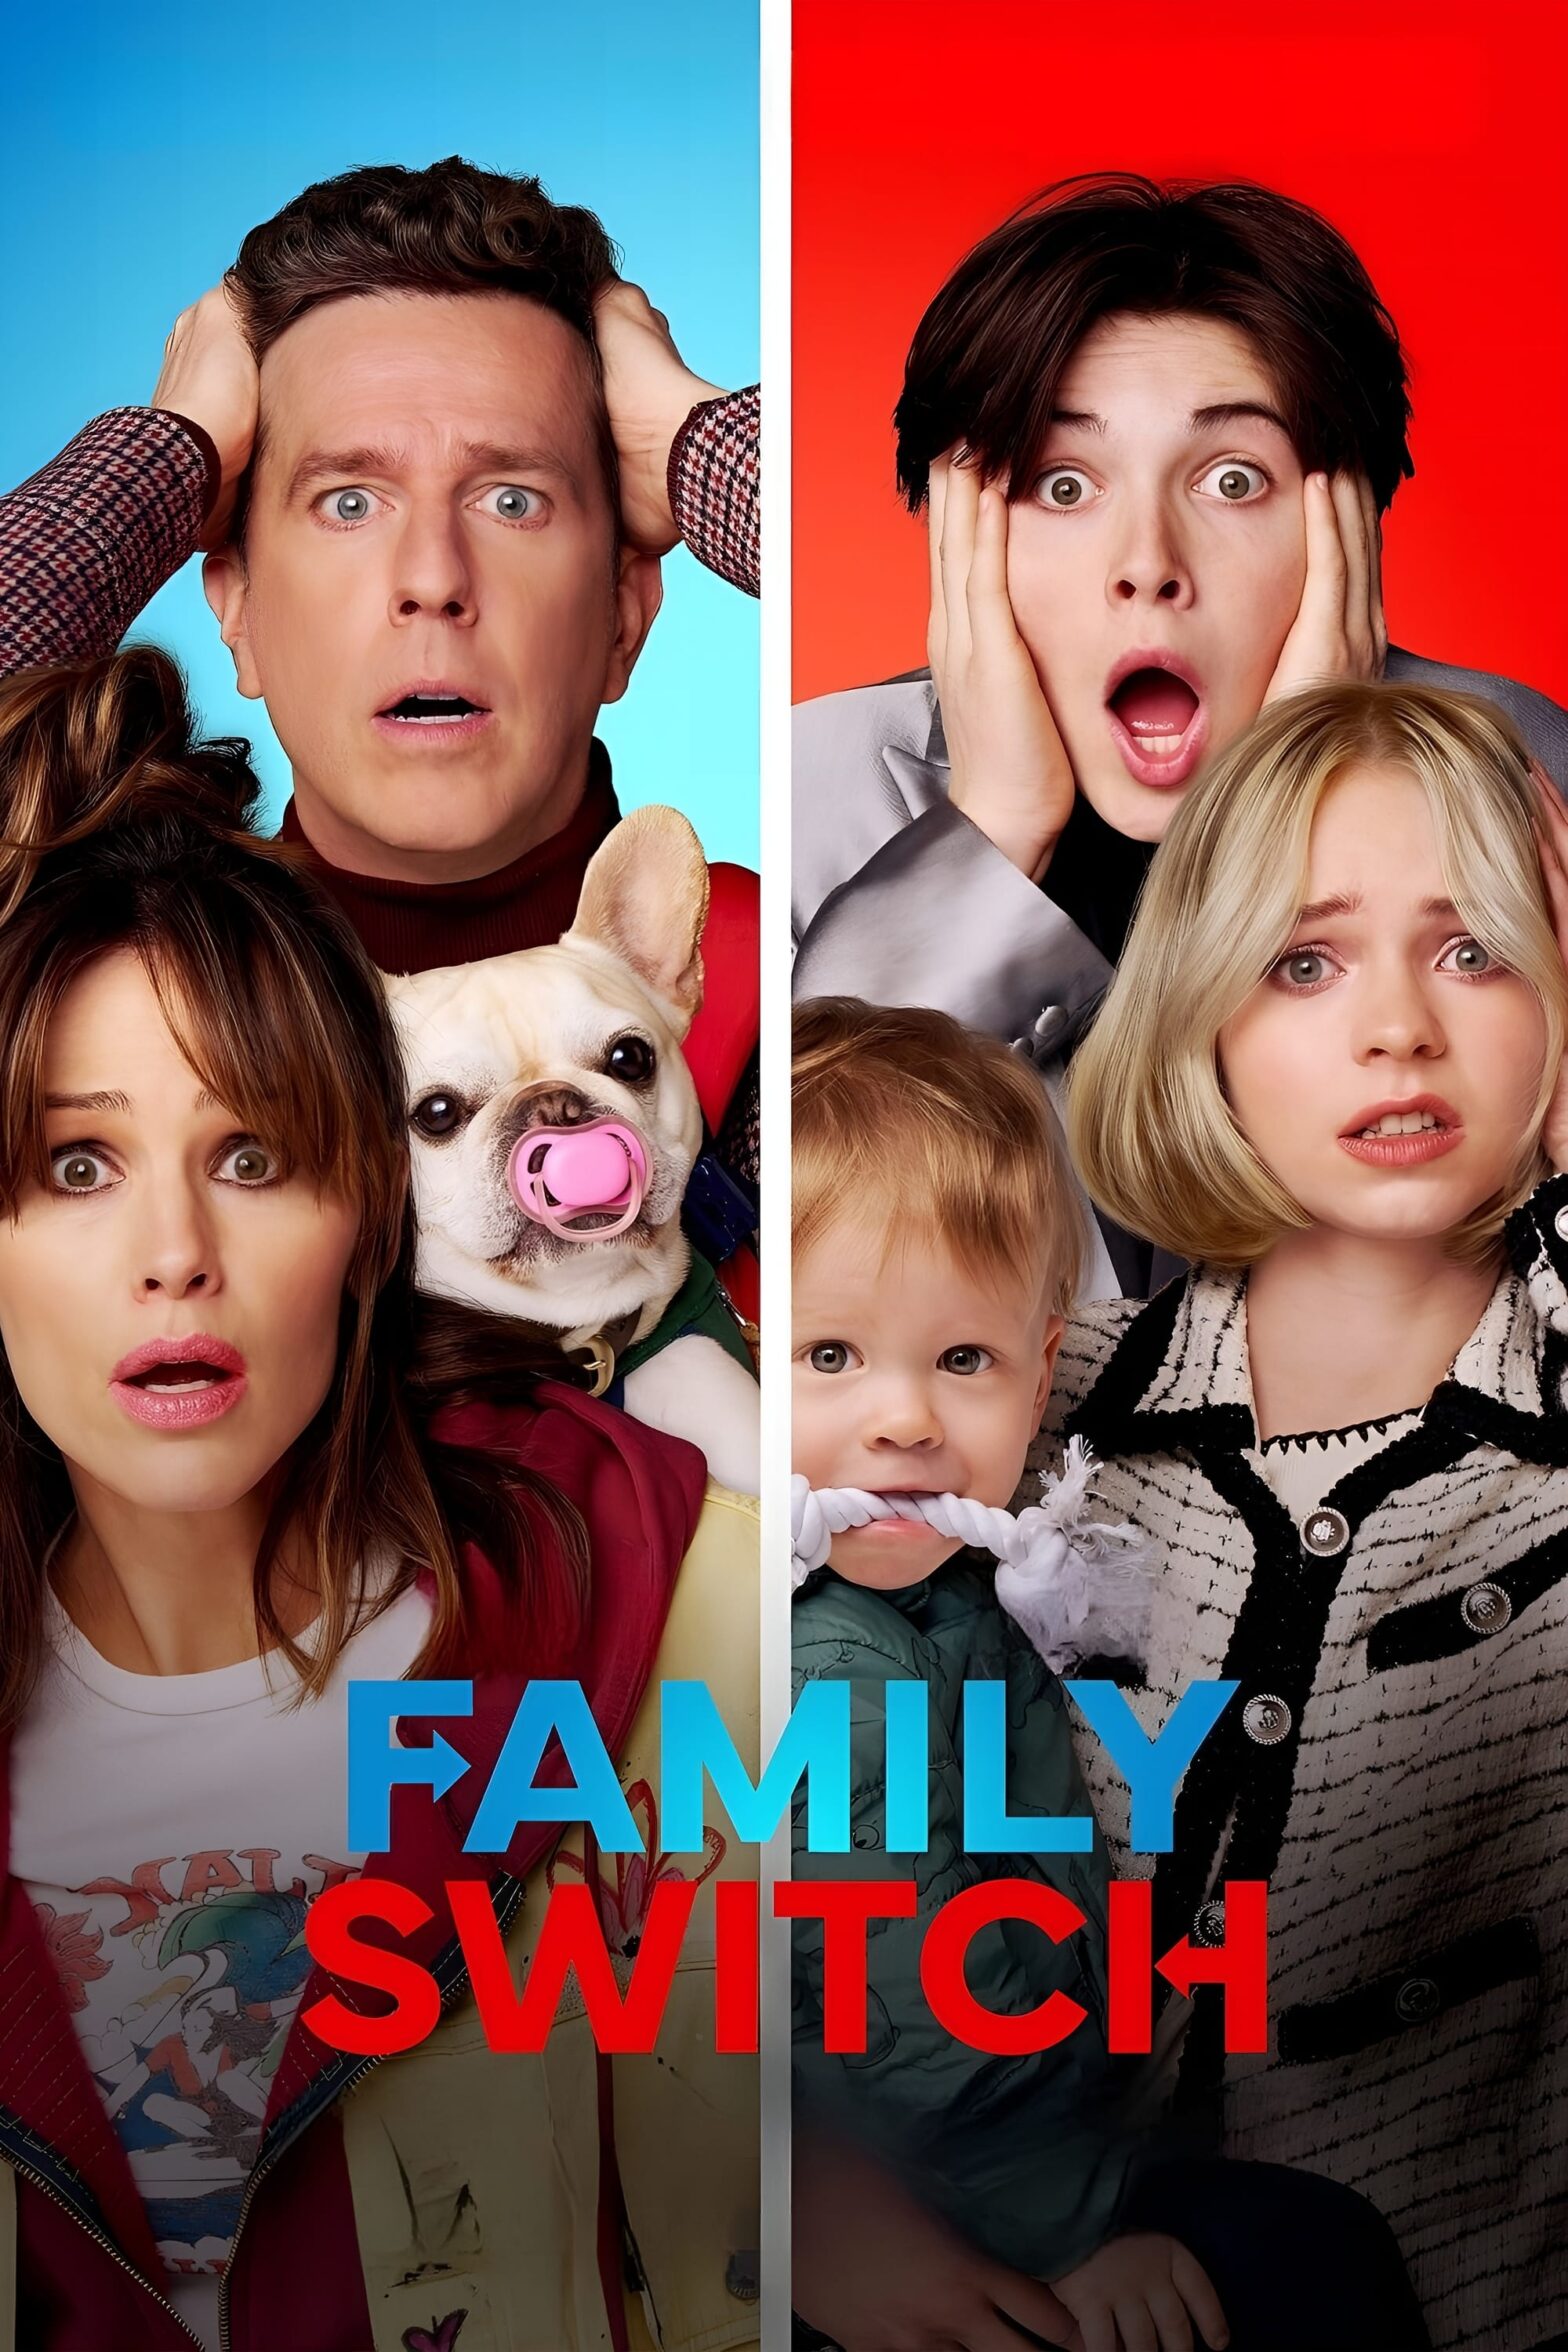 Poster for the movie "Family Switch"